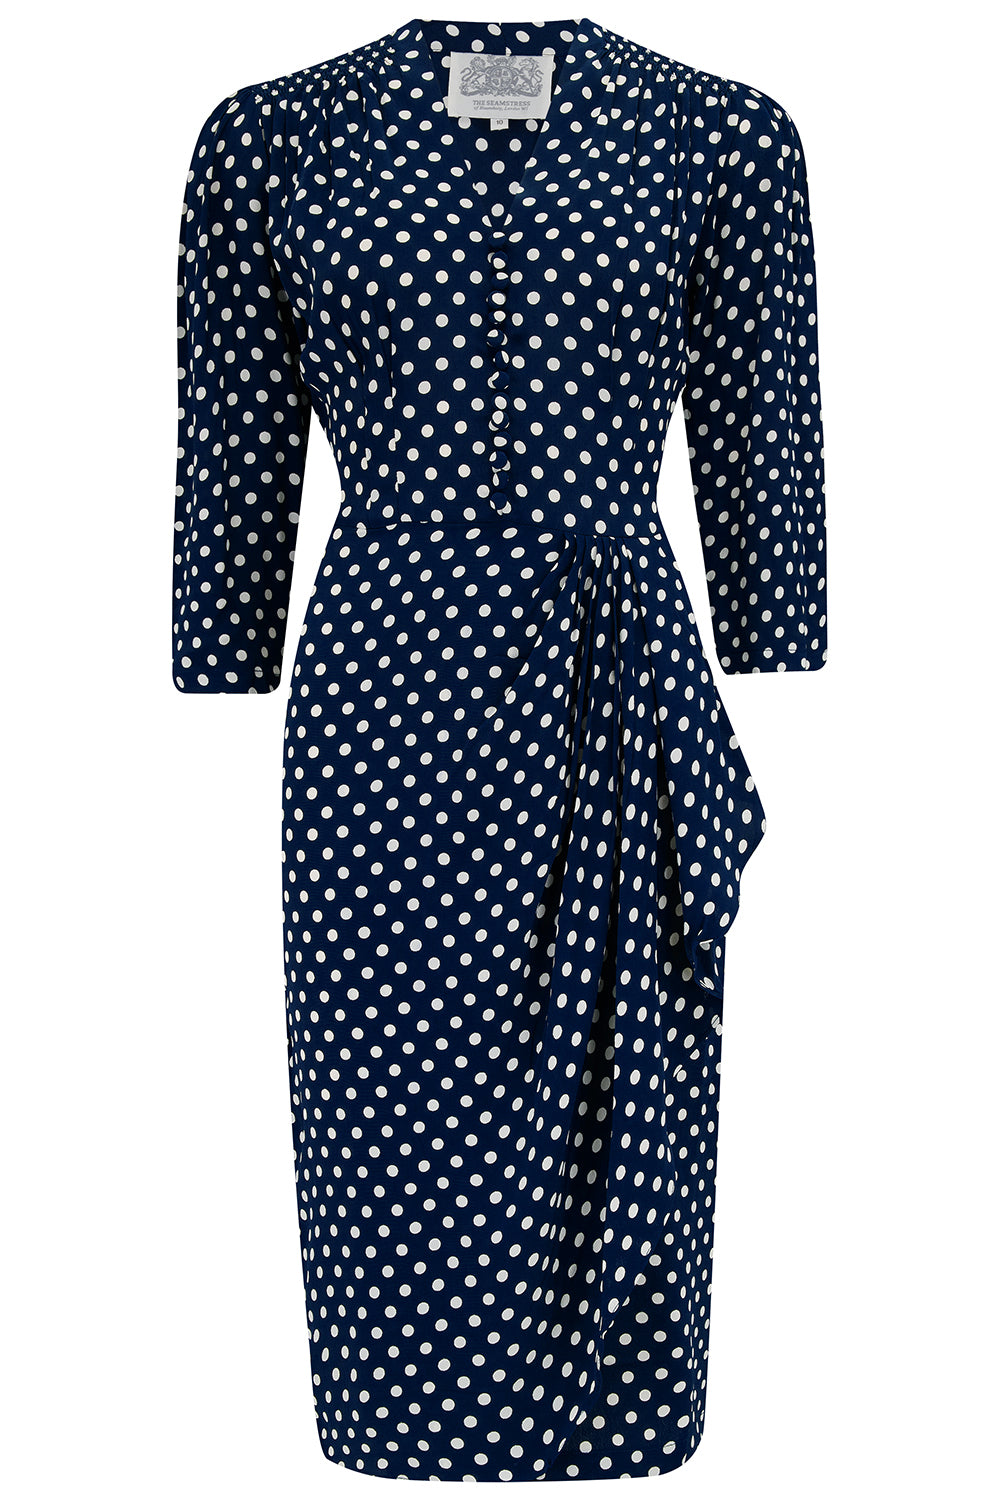 "Mabel" 3/4 Sleeve Dress in Navy Polka , A Classic 1940s Inspired Vintage Style - True and authentic vintage style clothing, inspired by the Classic styles of CC41 , WW2 and the fun 1950s RocknRoll era, for everyday wear plus events like Goodwood Revival, Twinwood Festival and Viva Las Vegas Rockabilly Weekend Rock n Romance The Seamstress of Bloomsbury